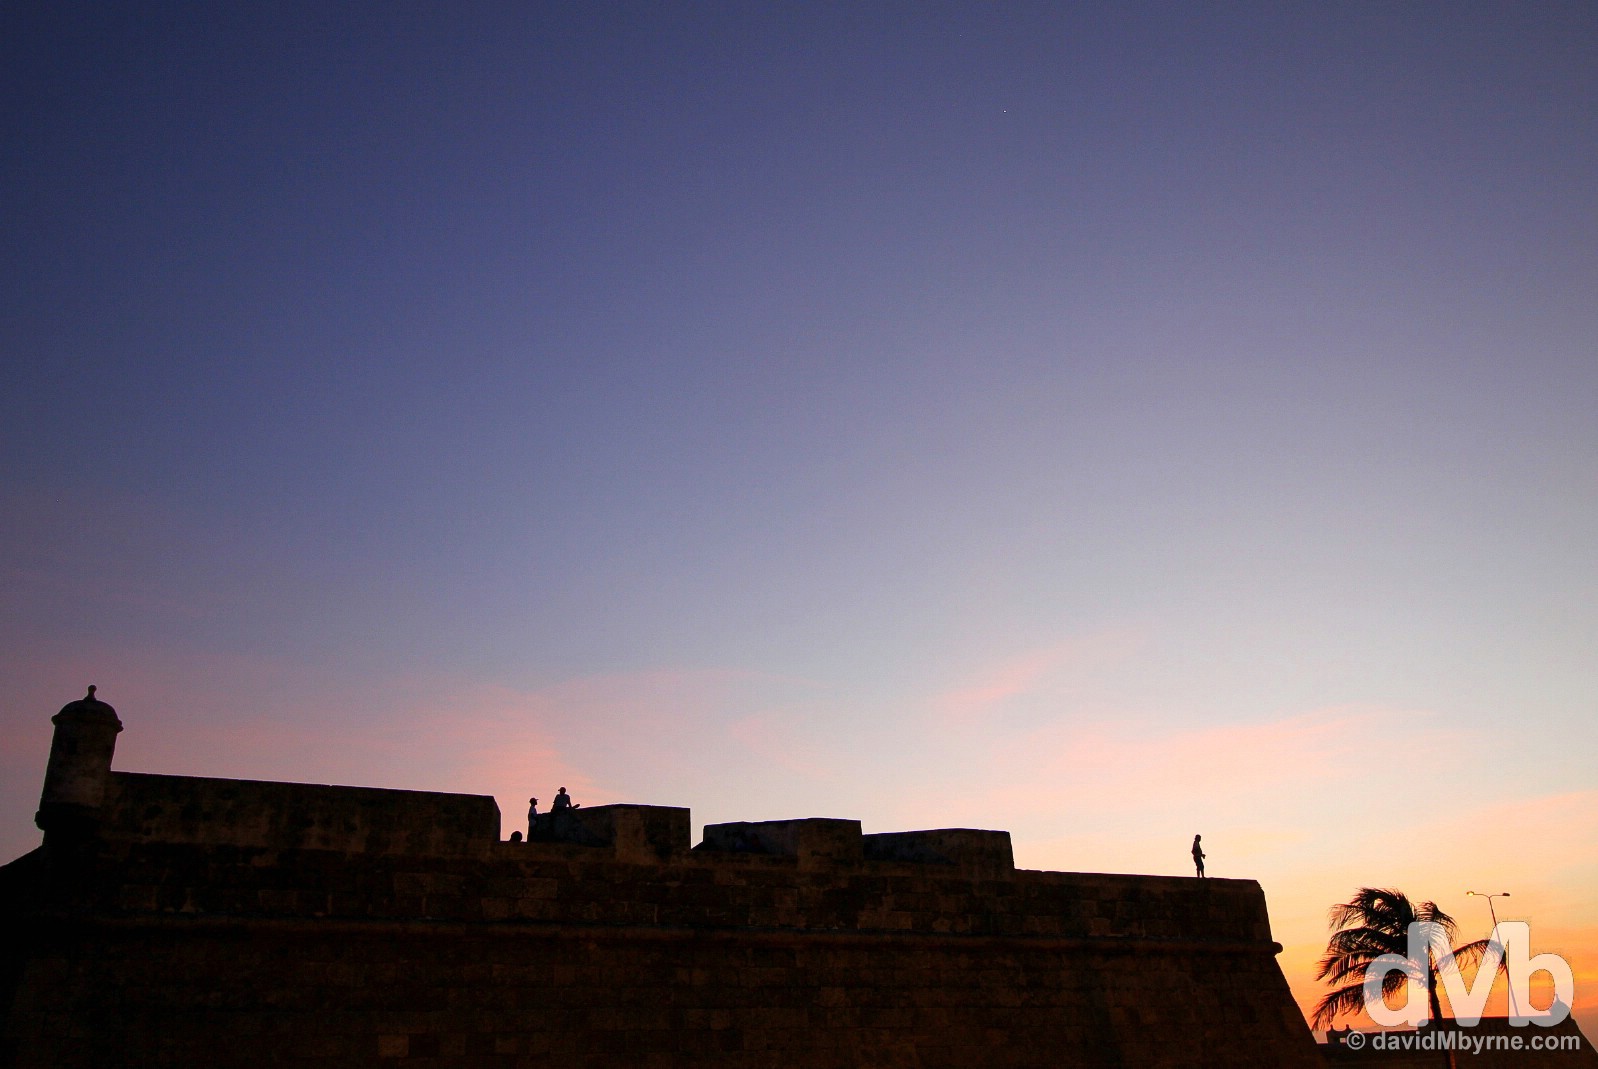 A section of Las Murallas, the Old Town walls of Cartagena, at twilight. Cartagena, Colombia. June 24, 2015.